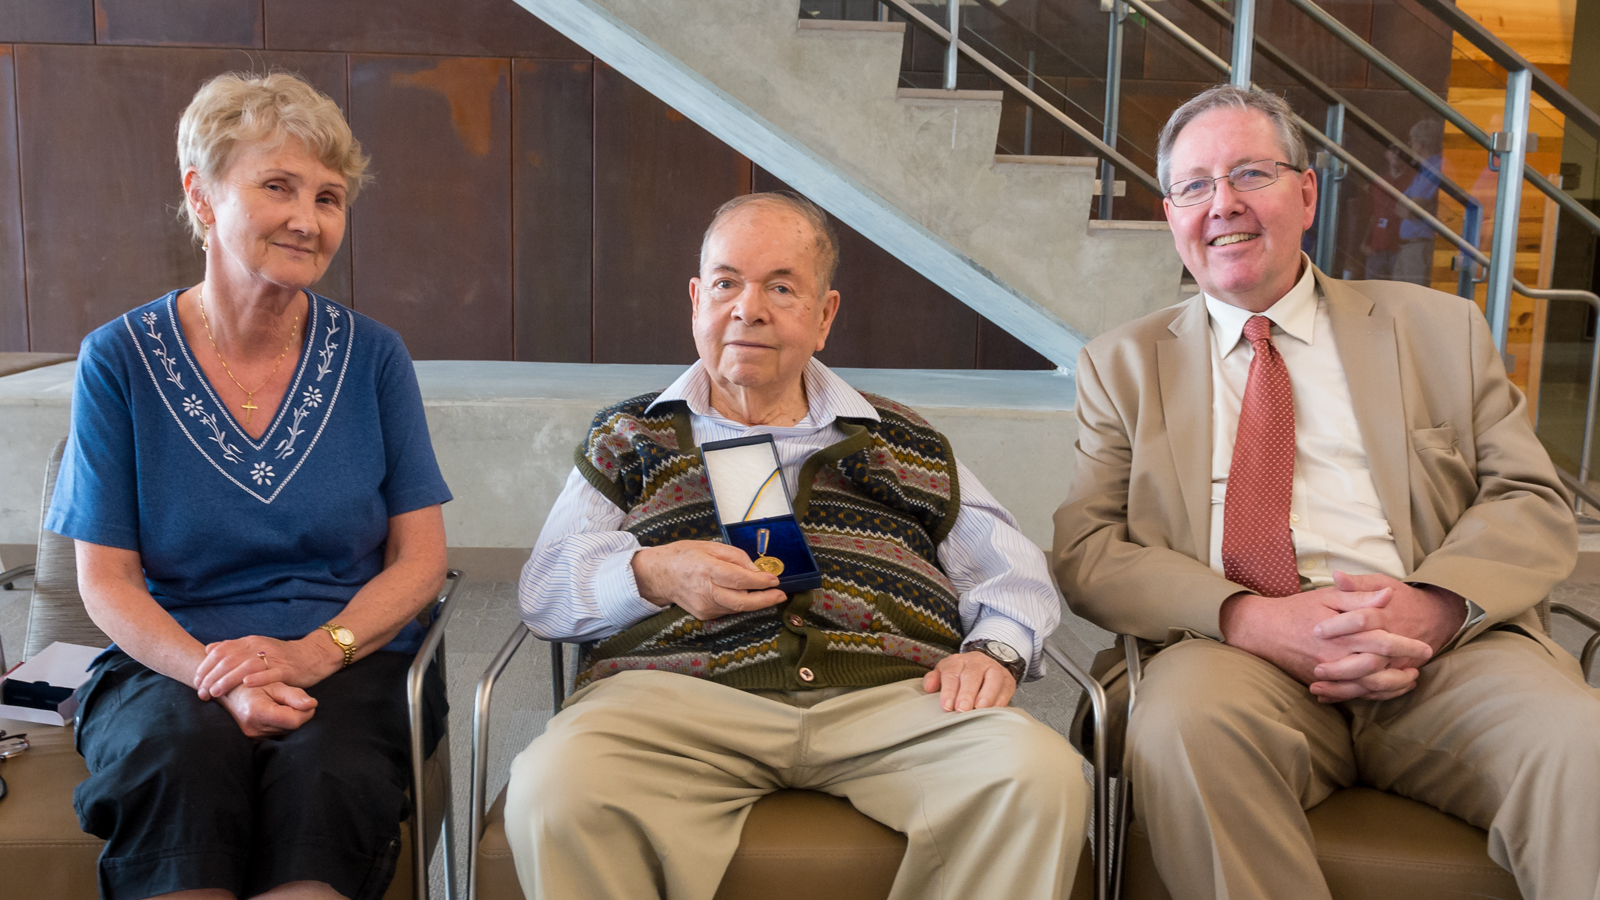 Abrikosov is pictured here with his wife, Svetlana Yuriyevna Bunkova, and former Argonne Director Peter Littlewood at a 2015 celebration in honor of Abrikosov receiving the Gold Medal of Vernadsky from the National Academy of Sciences of the Ukraine.